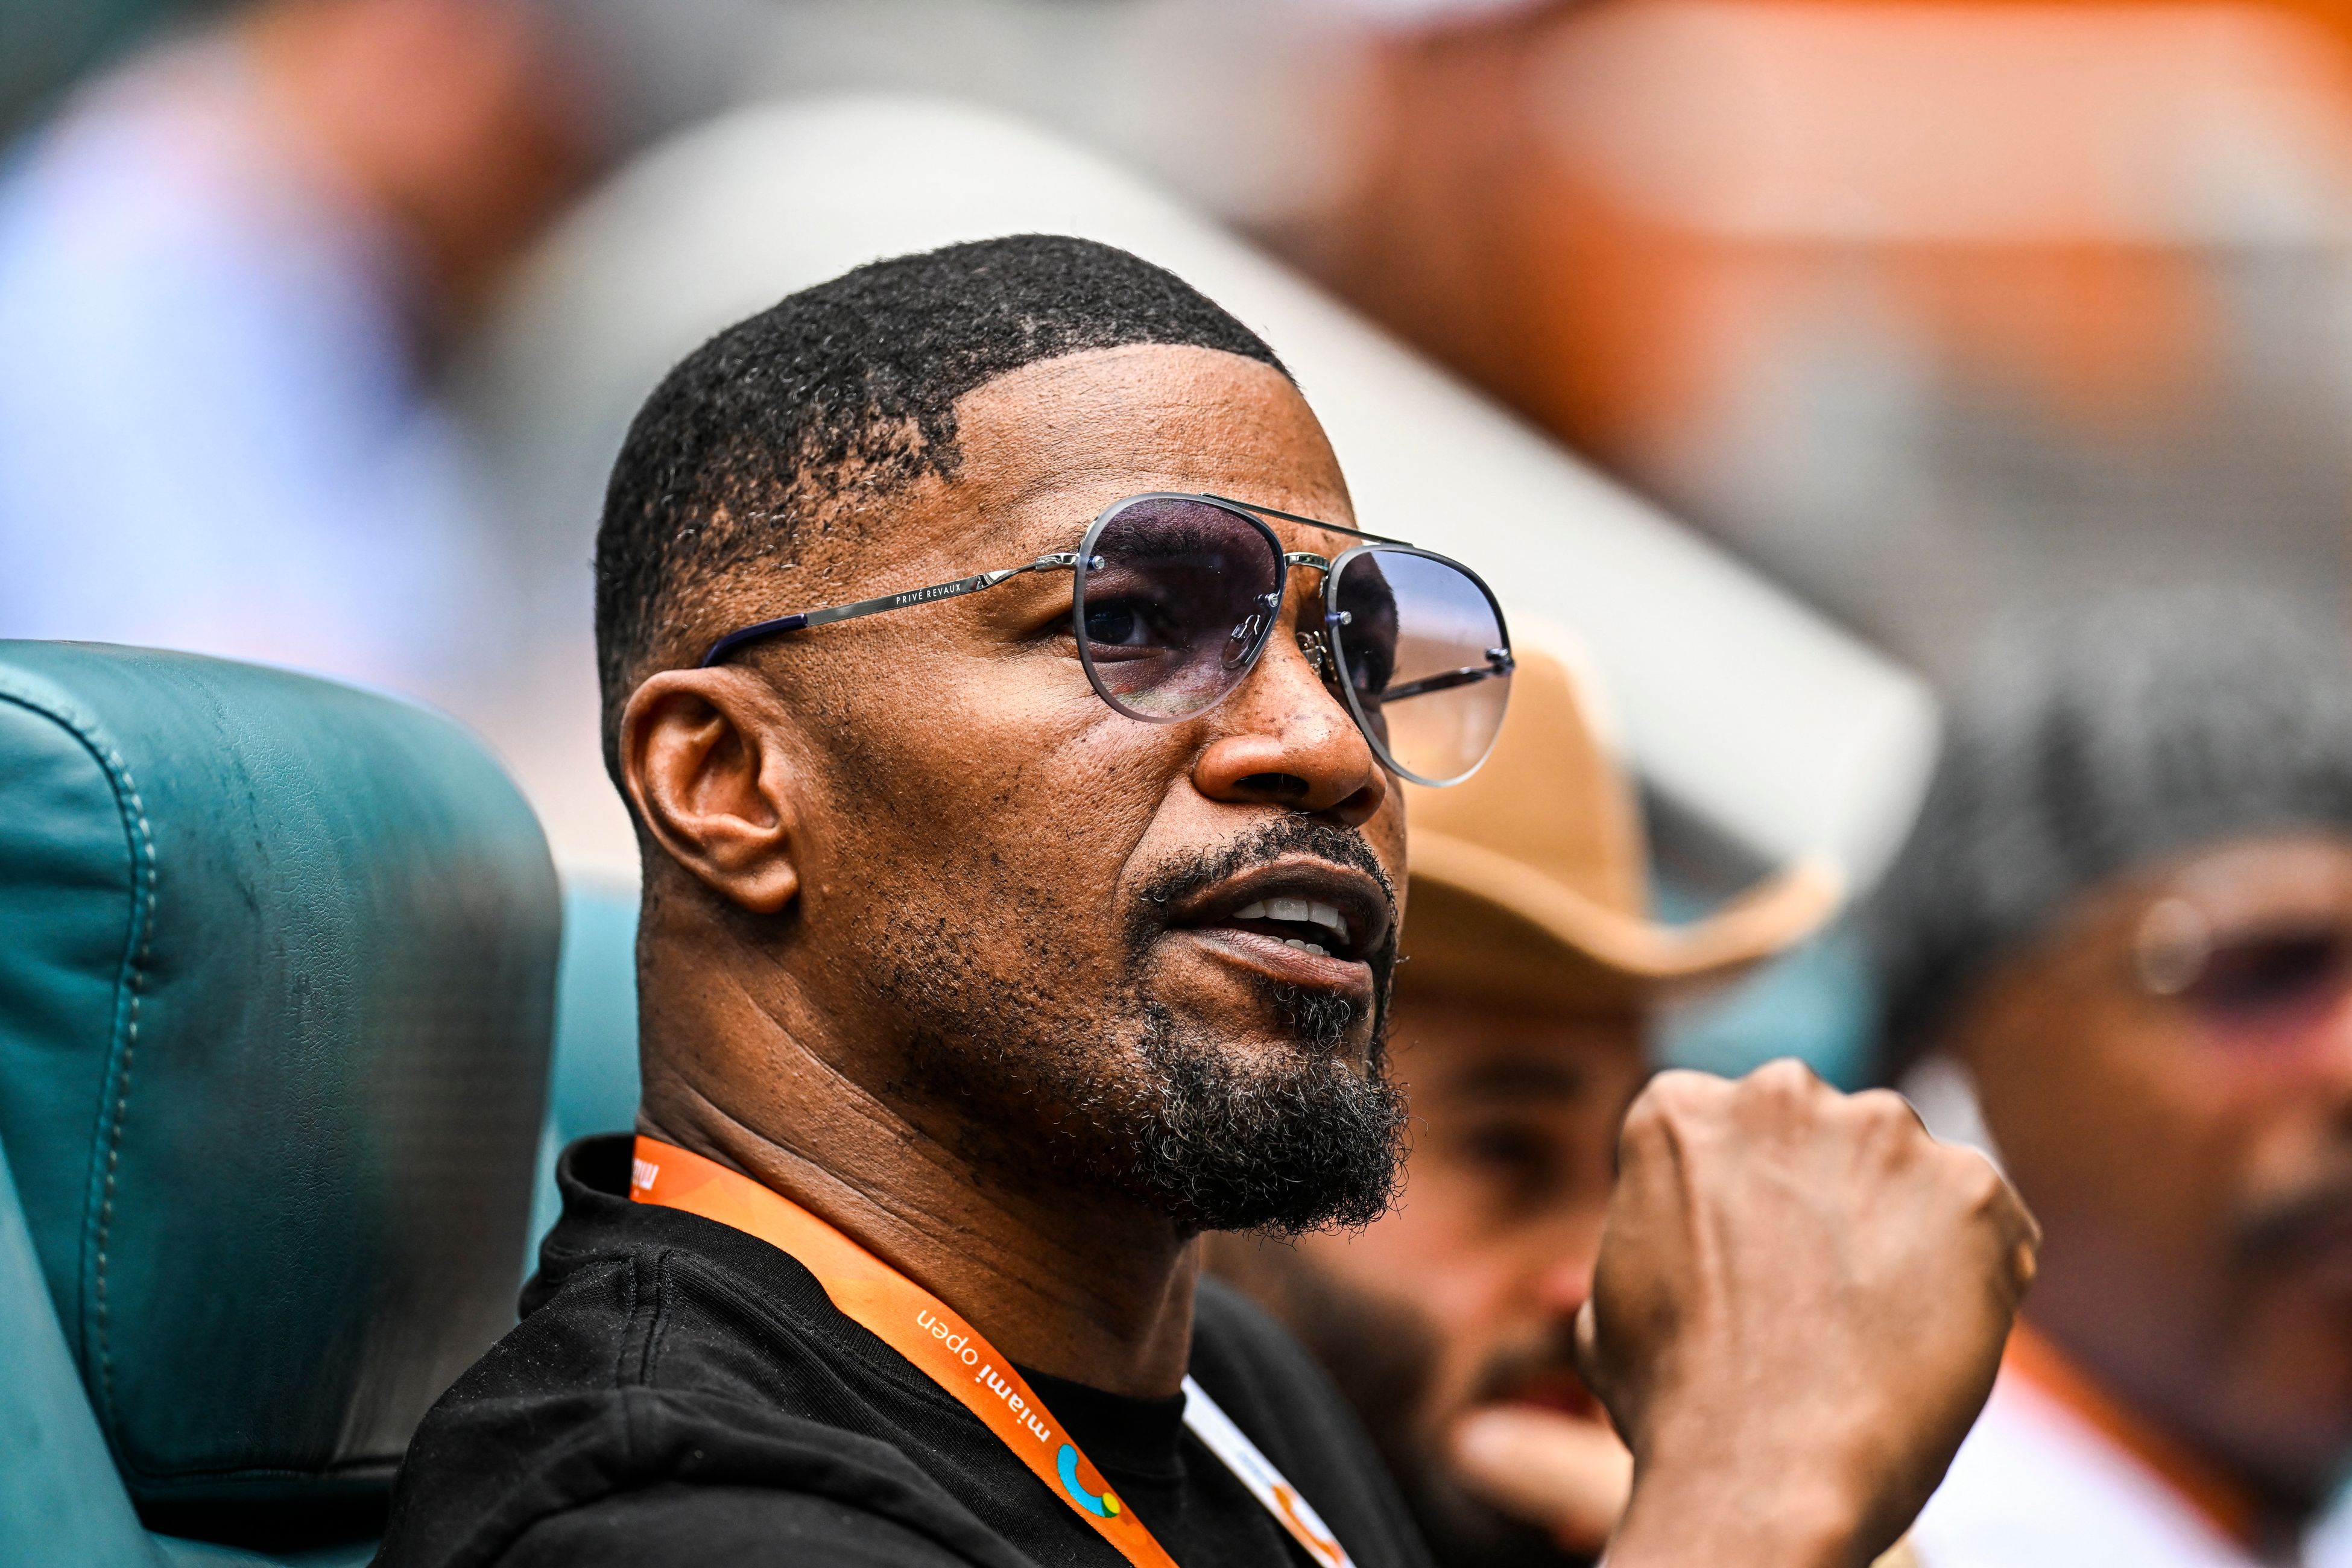 Jamie Foxx in Miami Gardens, Florida, on March 30, 2023 | Source: Getty Images